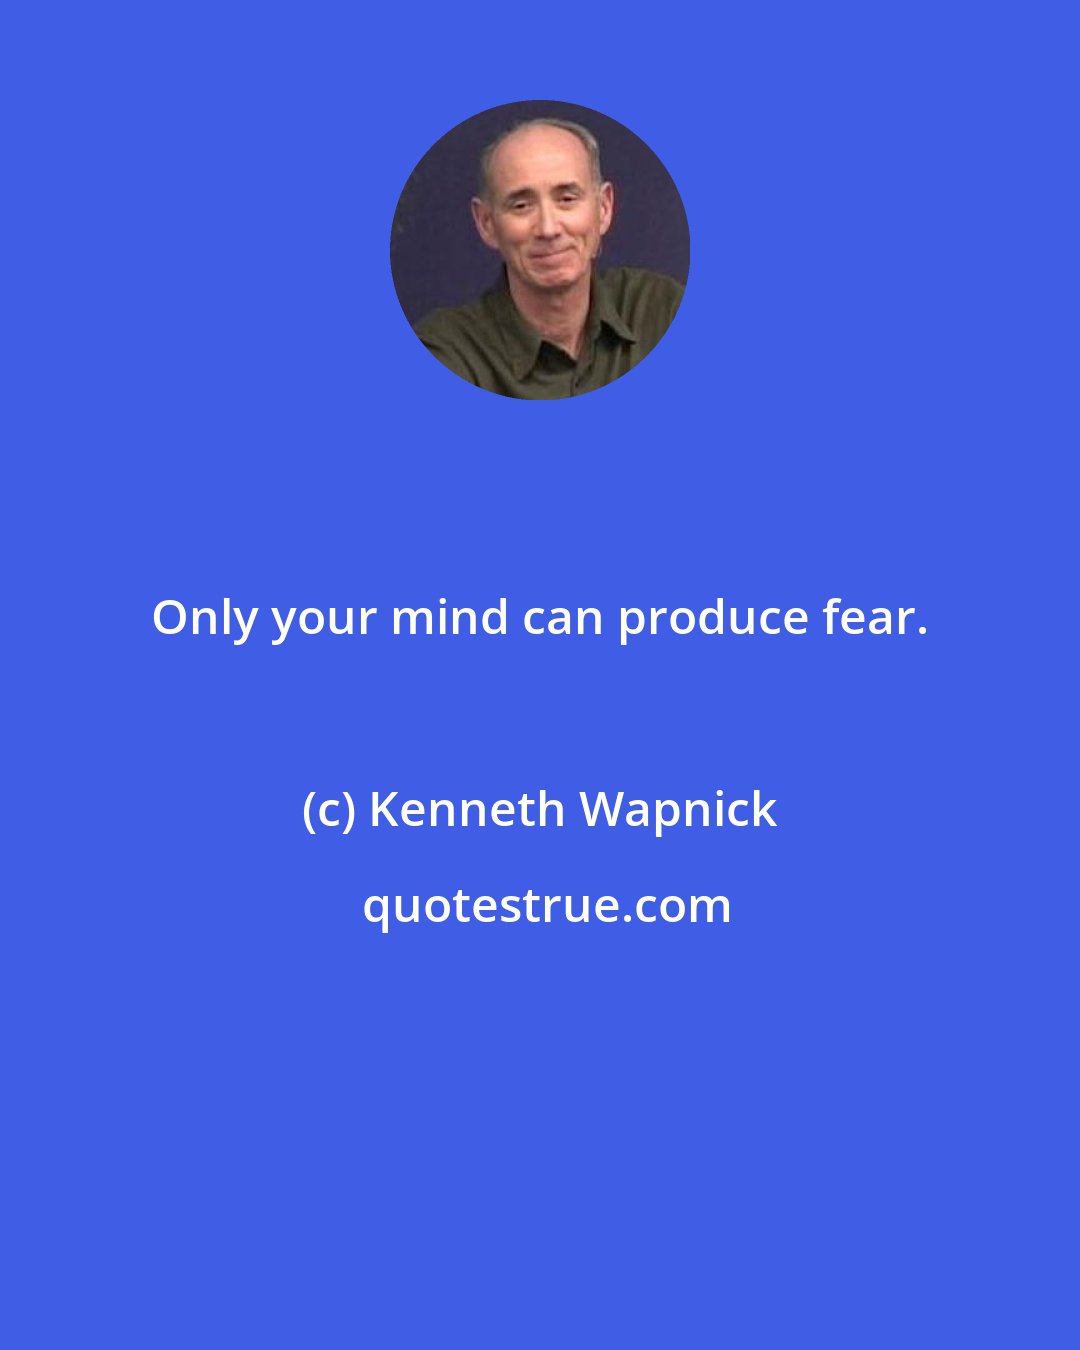 Kenneth Wapnick: Only your mind can produce fear.